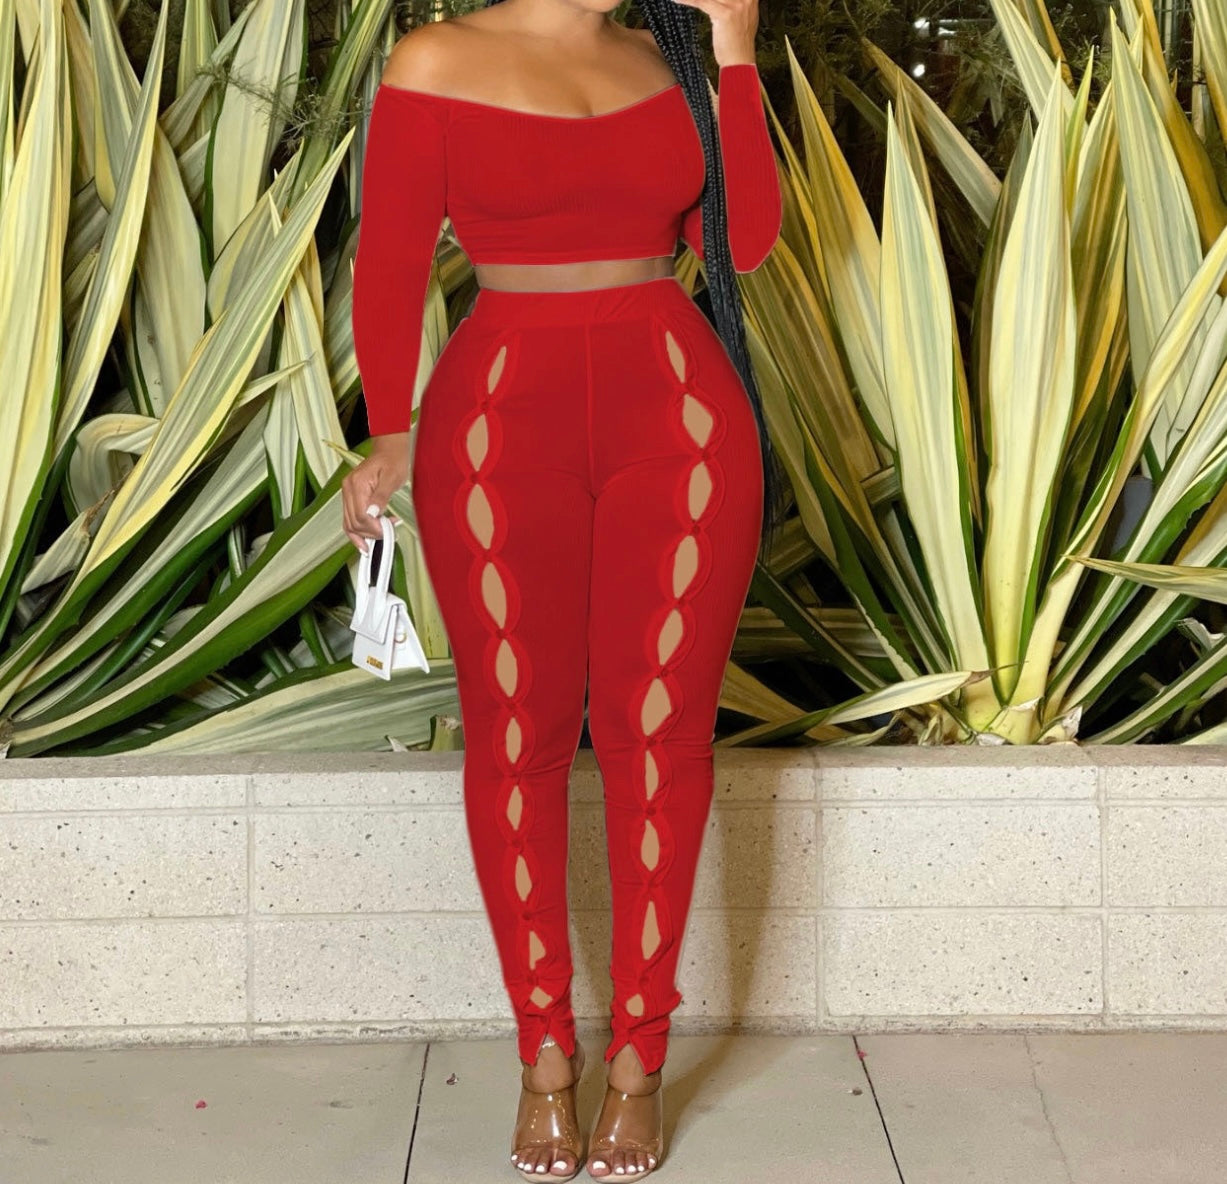 “Queen Of Hearts” (2-Piece Cut Out Set)